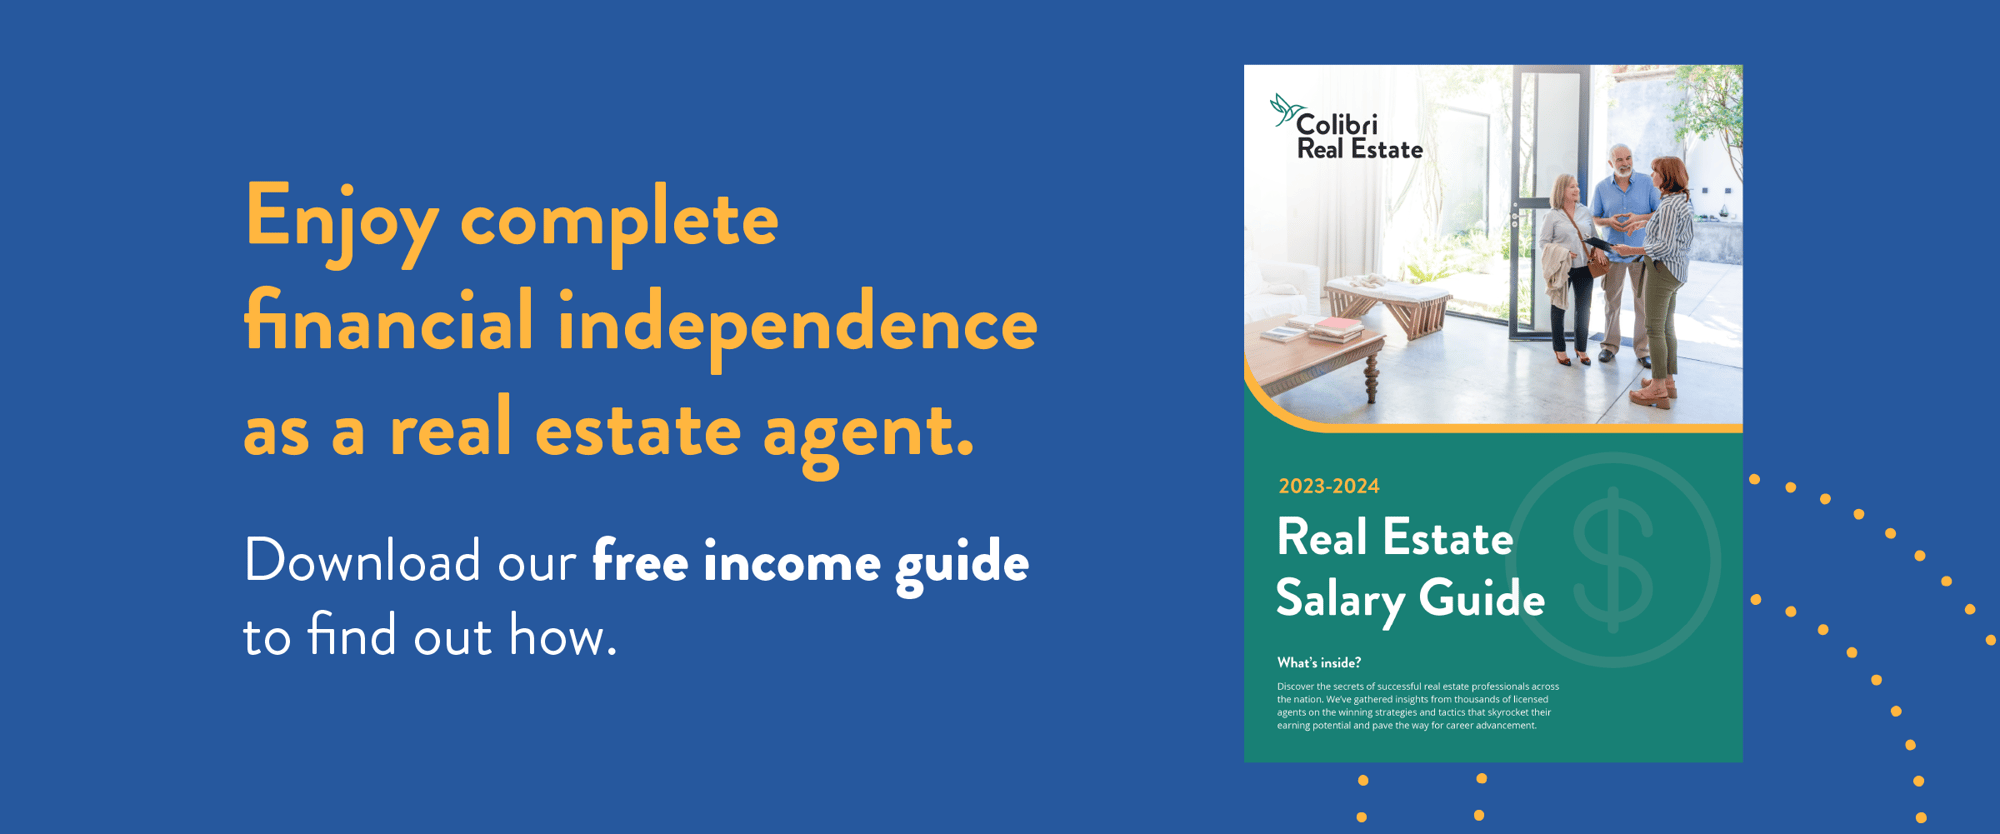 CRE_Salary_Guide_Download